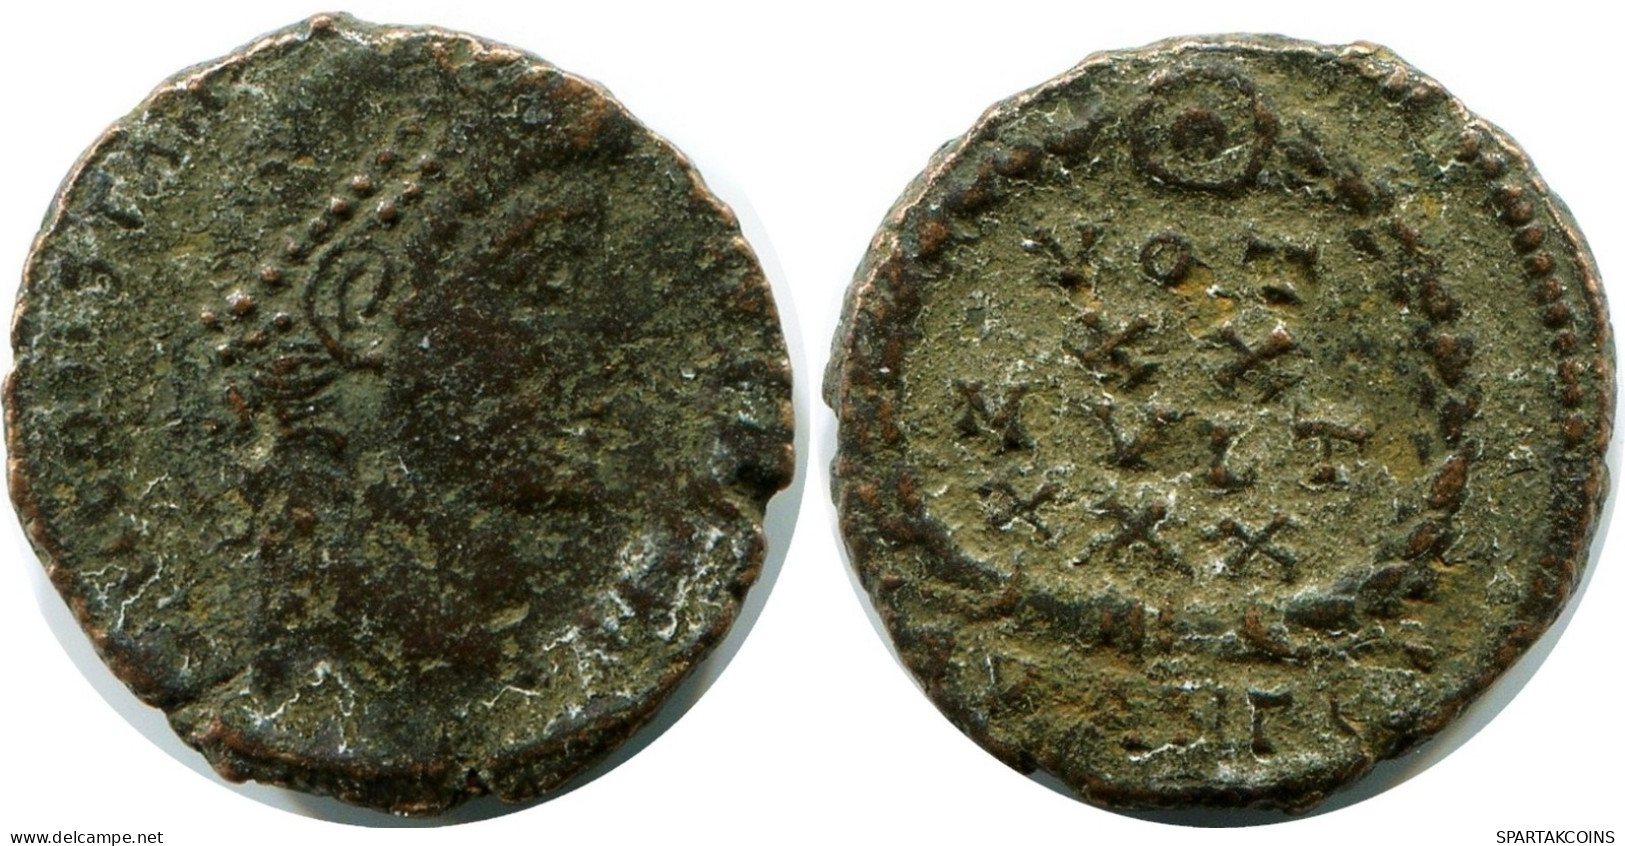 ROMAN Moneda MINTED IN ANTIOCH FOUND IN IHNASYAH HOARD EGYPT #ANC11300.14.E.A - The Christian Empire (307 AD Tot 363 AD)